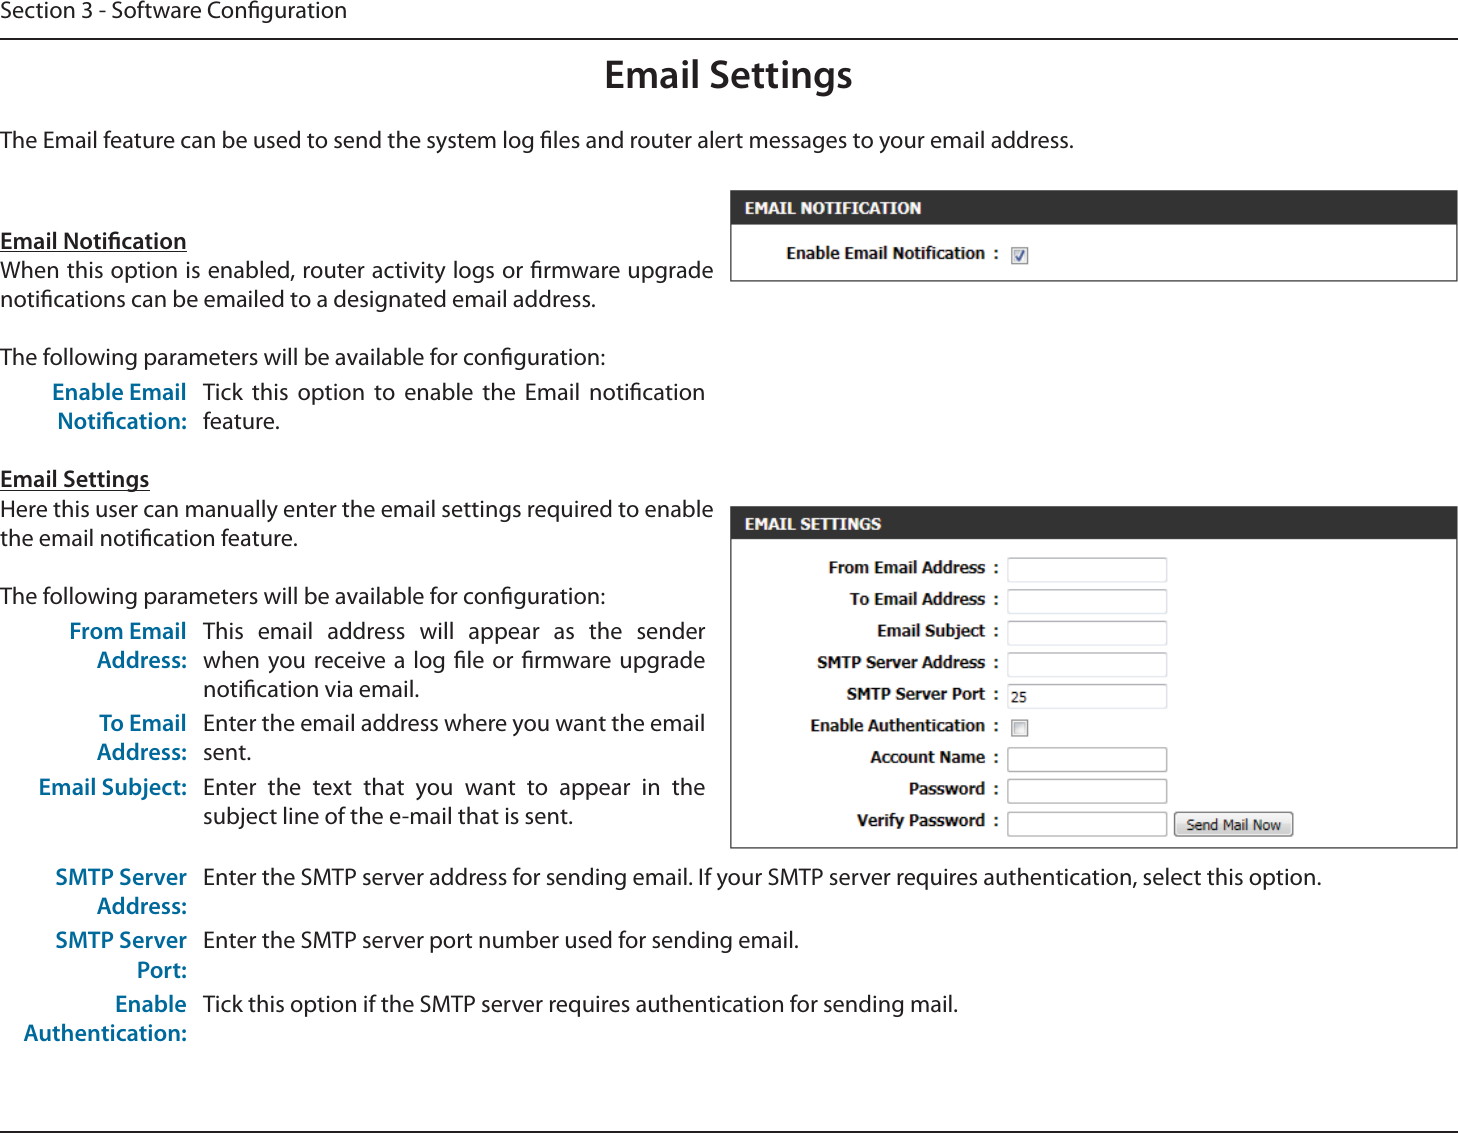 Section 3 - Software CongurationEmail SettingsEmail NoticationWhen this option is enabled, router activity logs or rmware upgrade notications can be emailed to a designated email address.The following parameters will be available for conguration:Enable Email Notication:Tick this option to enable the Email notication feature.Email SettingsHere this user can manually enter the email settings required to enable the email notication feature.The following parameters will be available for conguration:From Email Address:This email address will appear as the sender when you receive a log le or rmware upgrade notication via email.To Email Address:Enter the email address where you want the email sent.Email Subject: Enter the text that you want to appear in the subject line of the e-mail that is sent.SMTP Server Address:Enter the SMTP server address for sending email. If your SMTP server requires authentication, select this option.SMTP Server Port:Enter the SMTP server port number used for sending email. Enable Authentication:Tick this option if the SMTP server requires authentication for sending mail.The Email feature can be used to send the system log les and router alert messages to your email address.